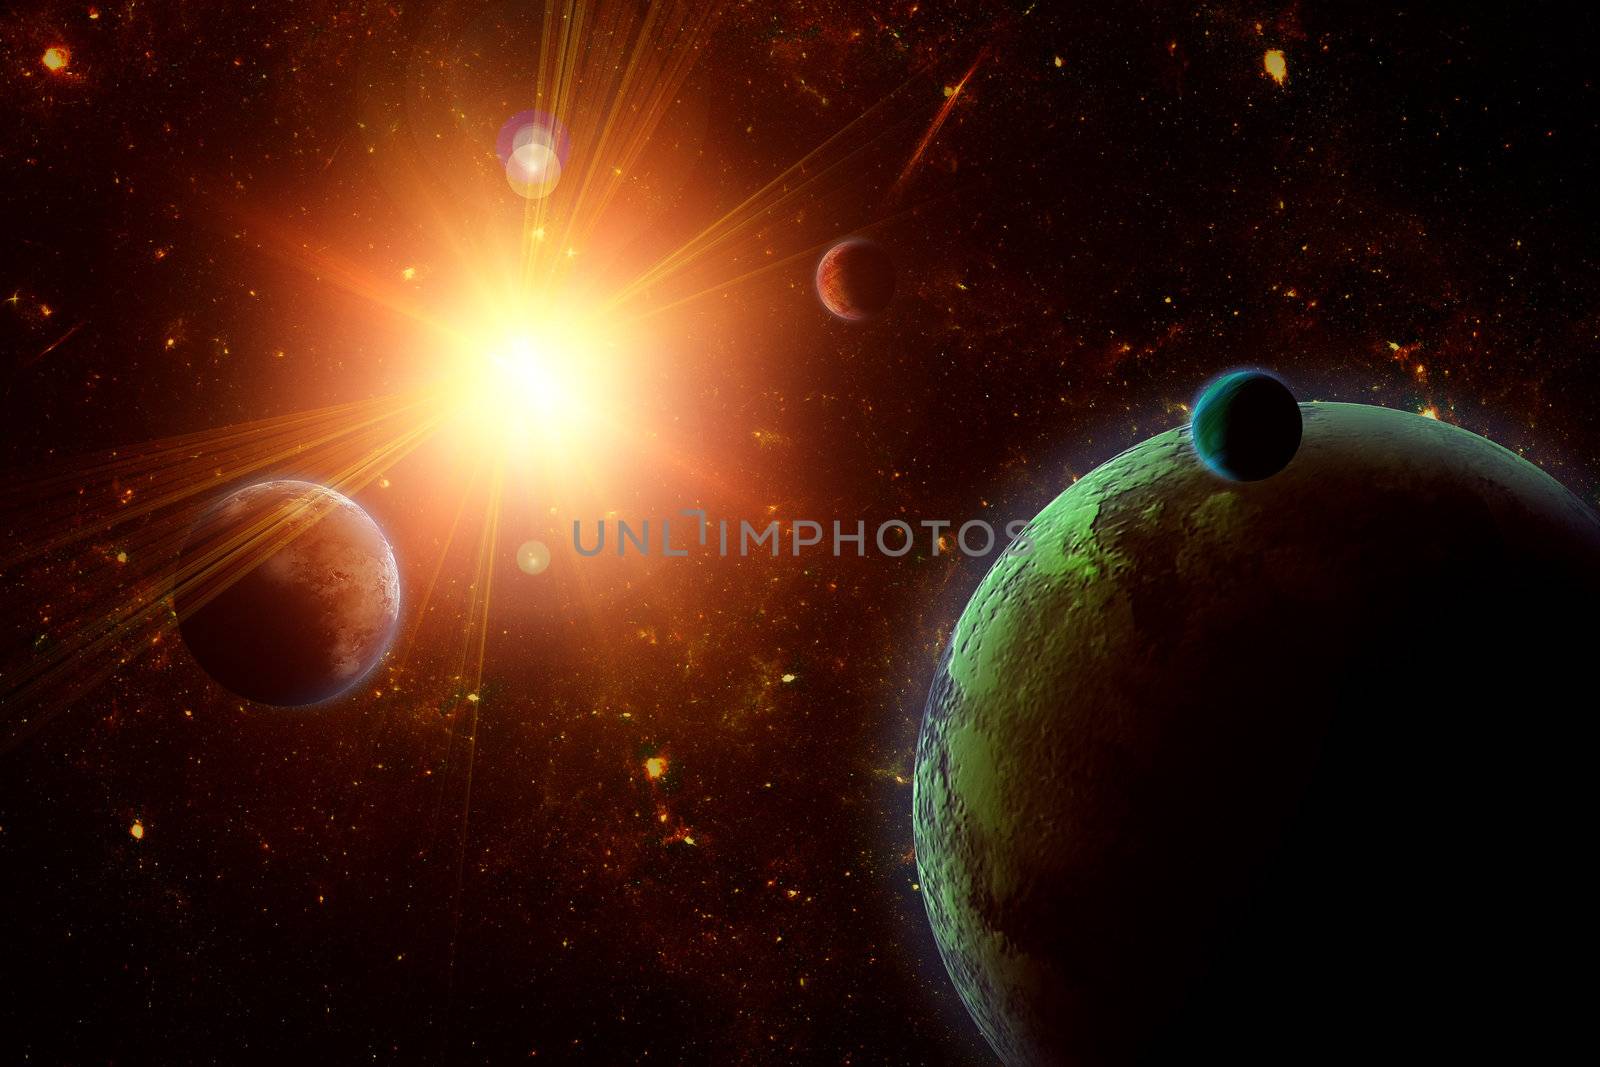 A view of planet, moons and the deep space. Abstract illustration of distant regions.